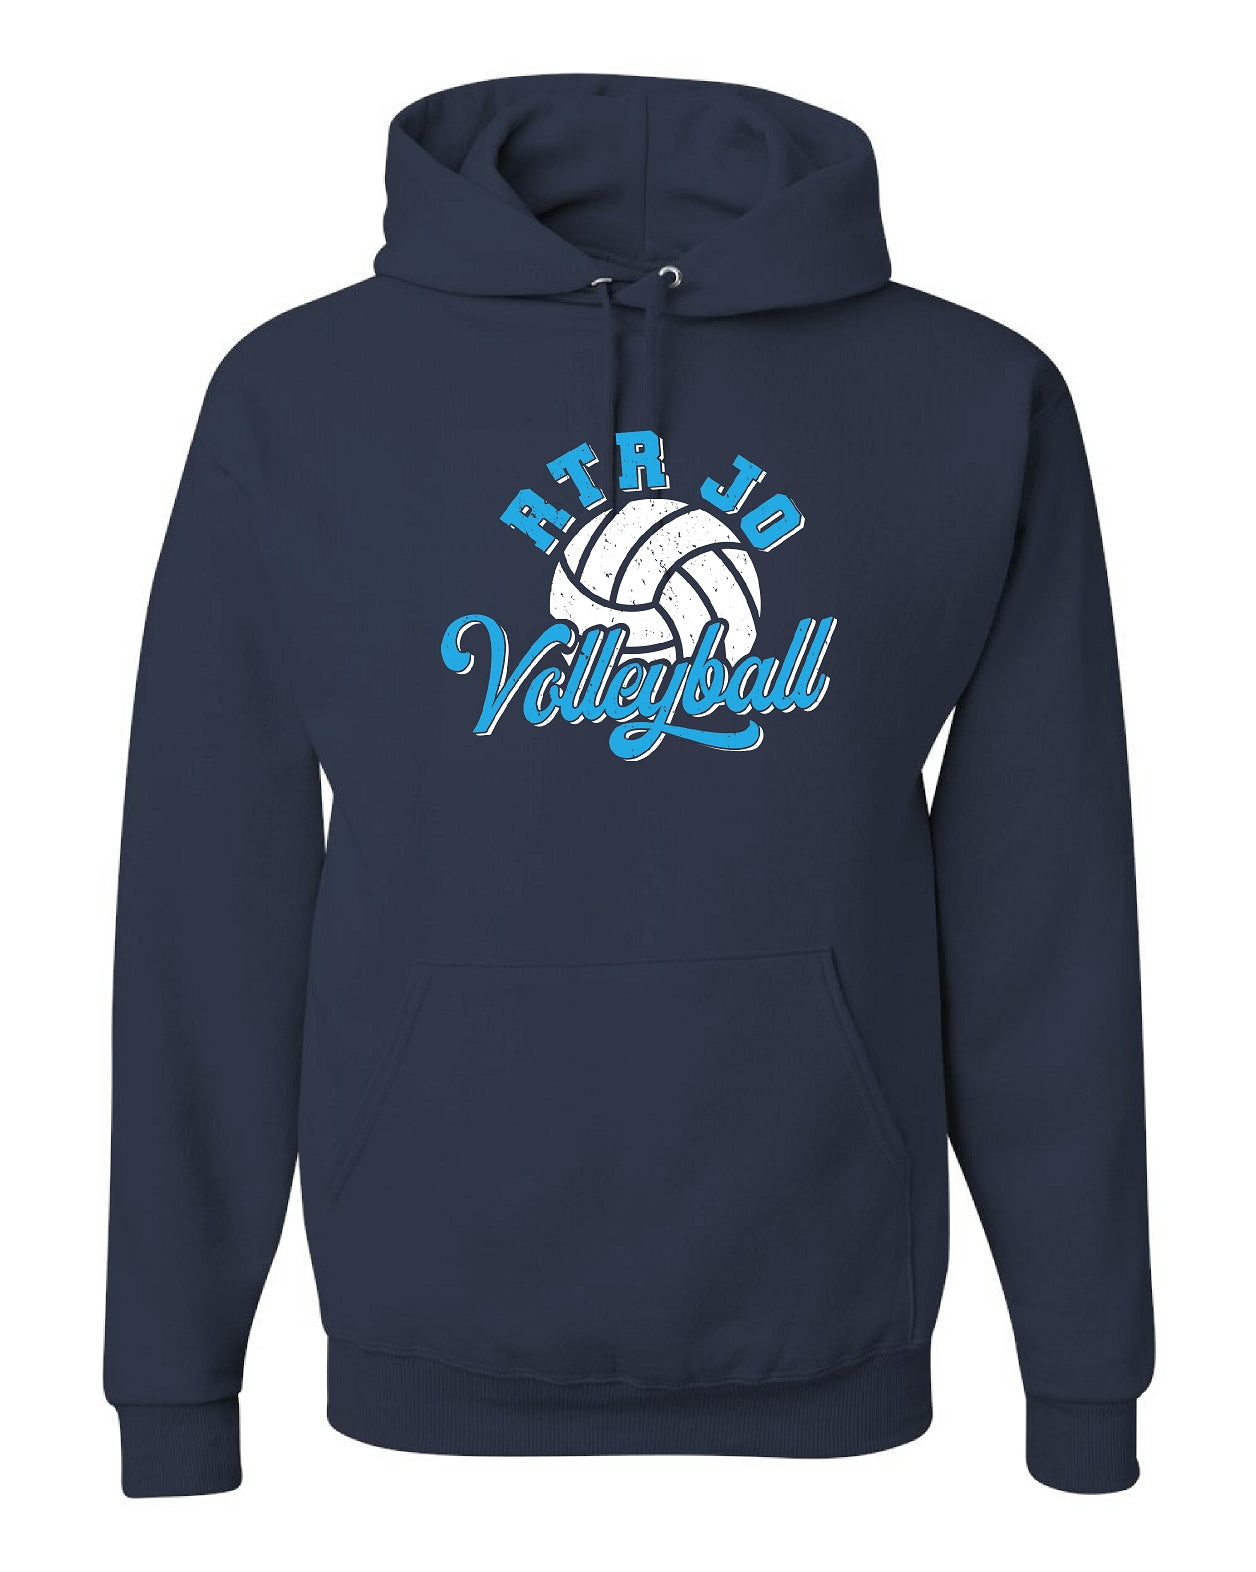 RTR JO Volleyball Hoodie – Measure by Design